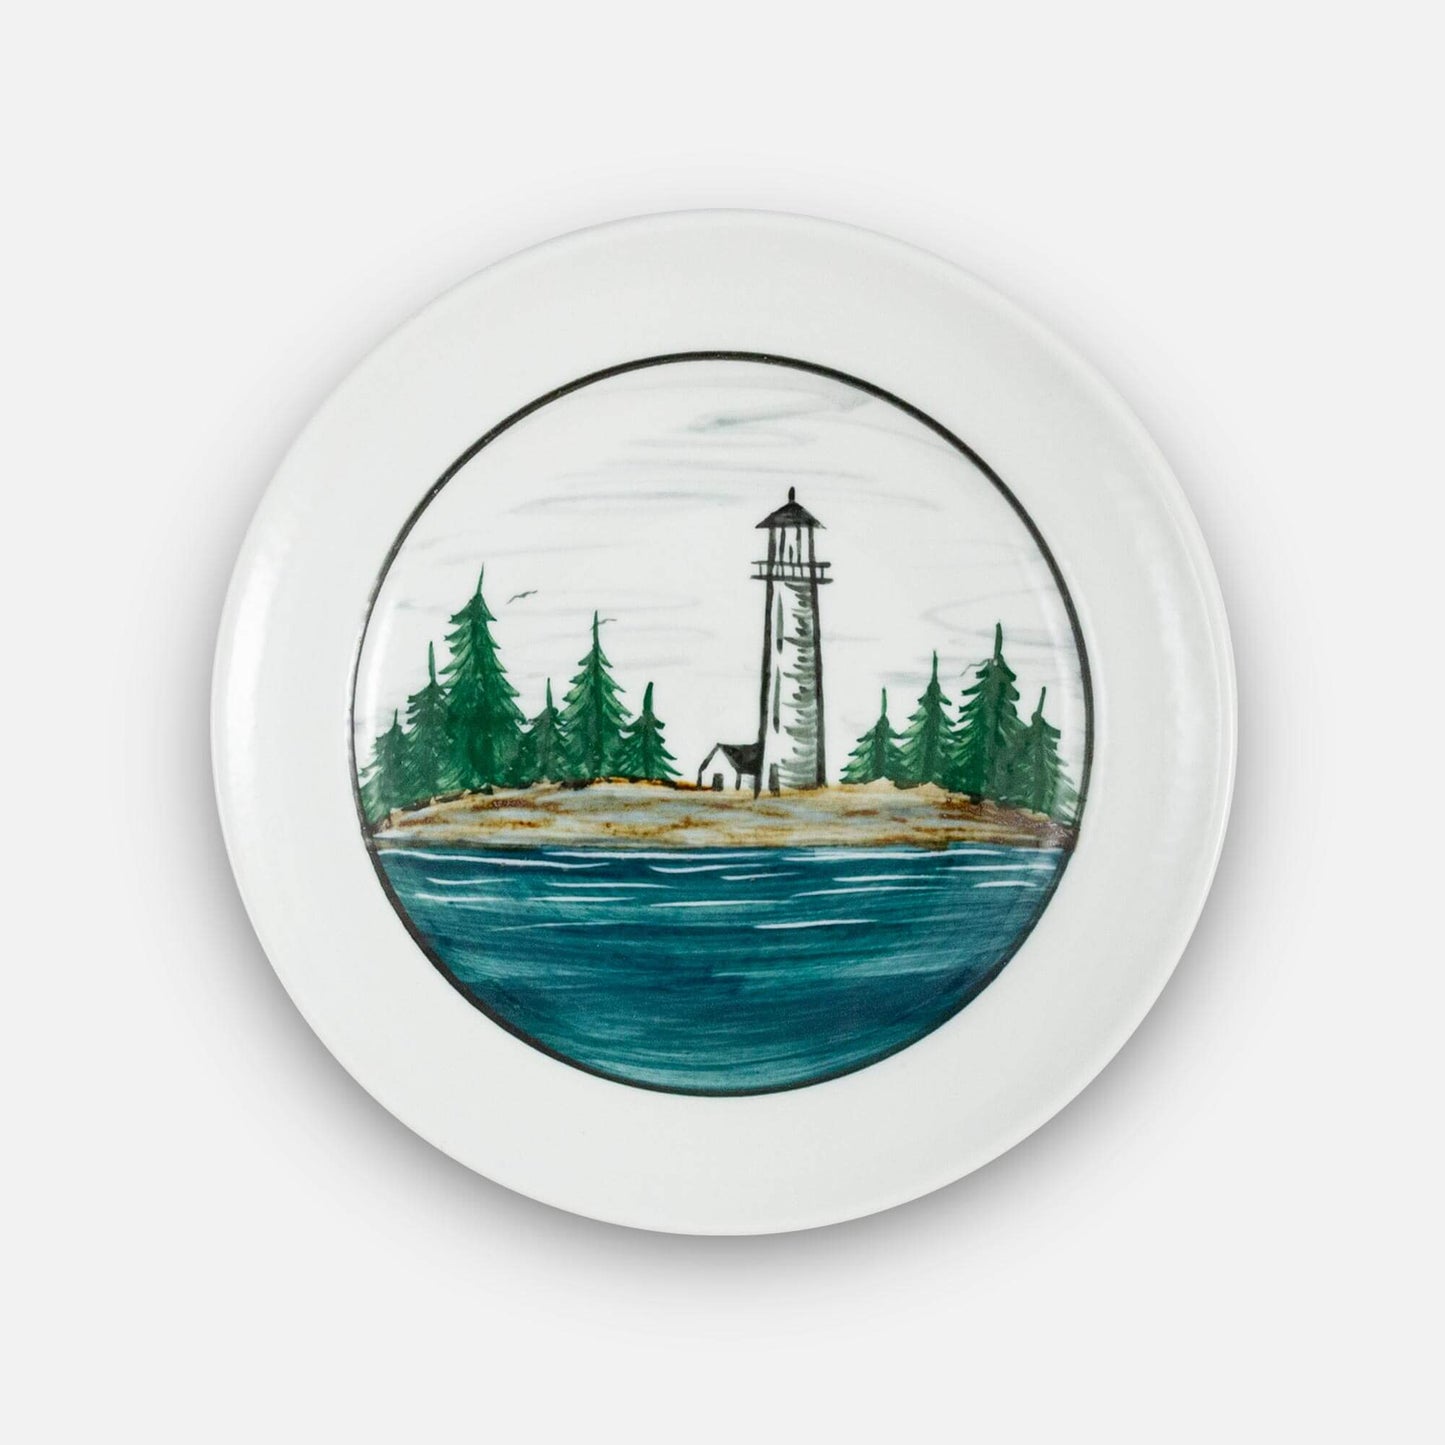 Handmade Pottery Classic Dinner Plate in Lighthouse pattern made by Georgetown Pottery in Maine